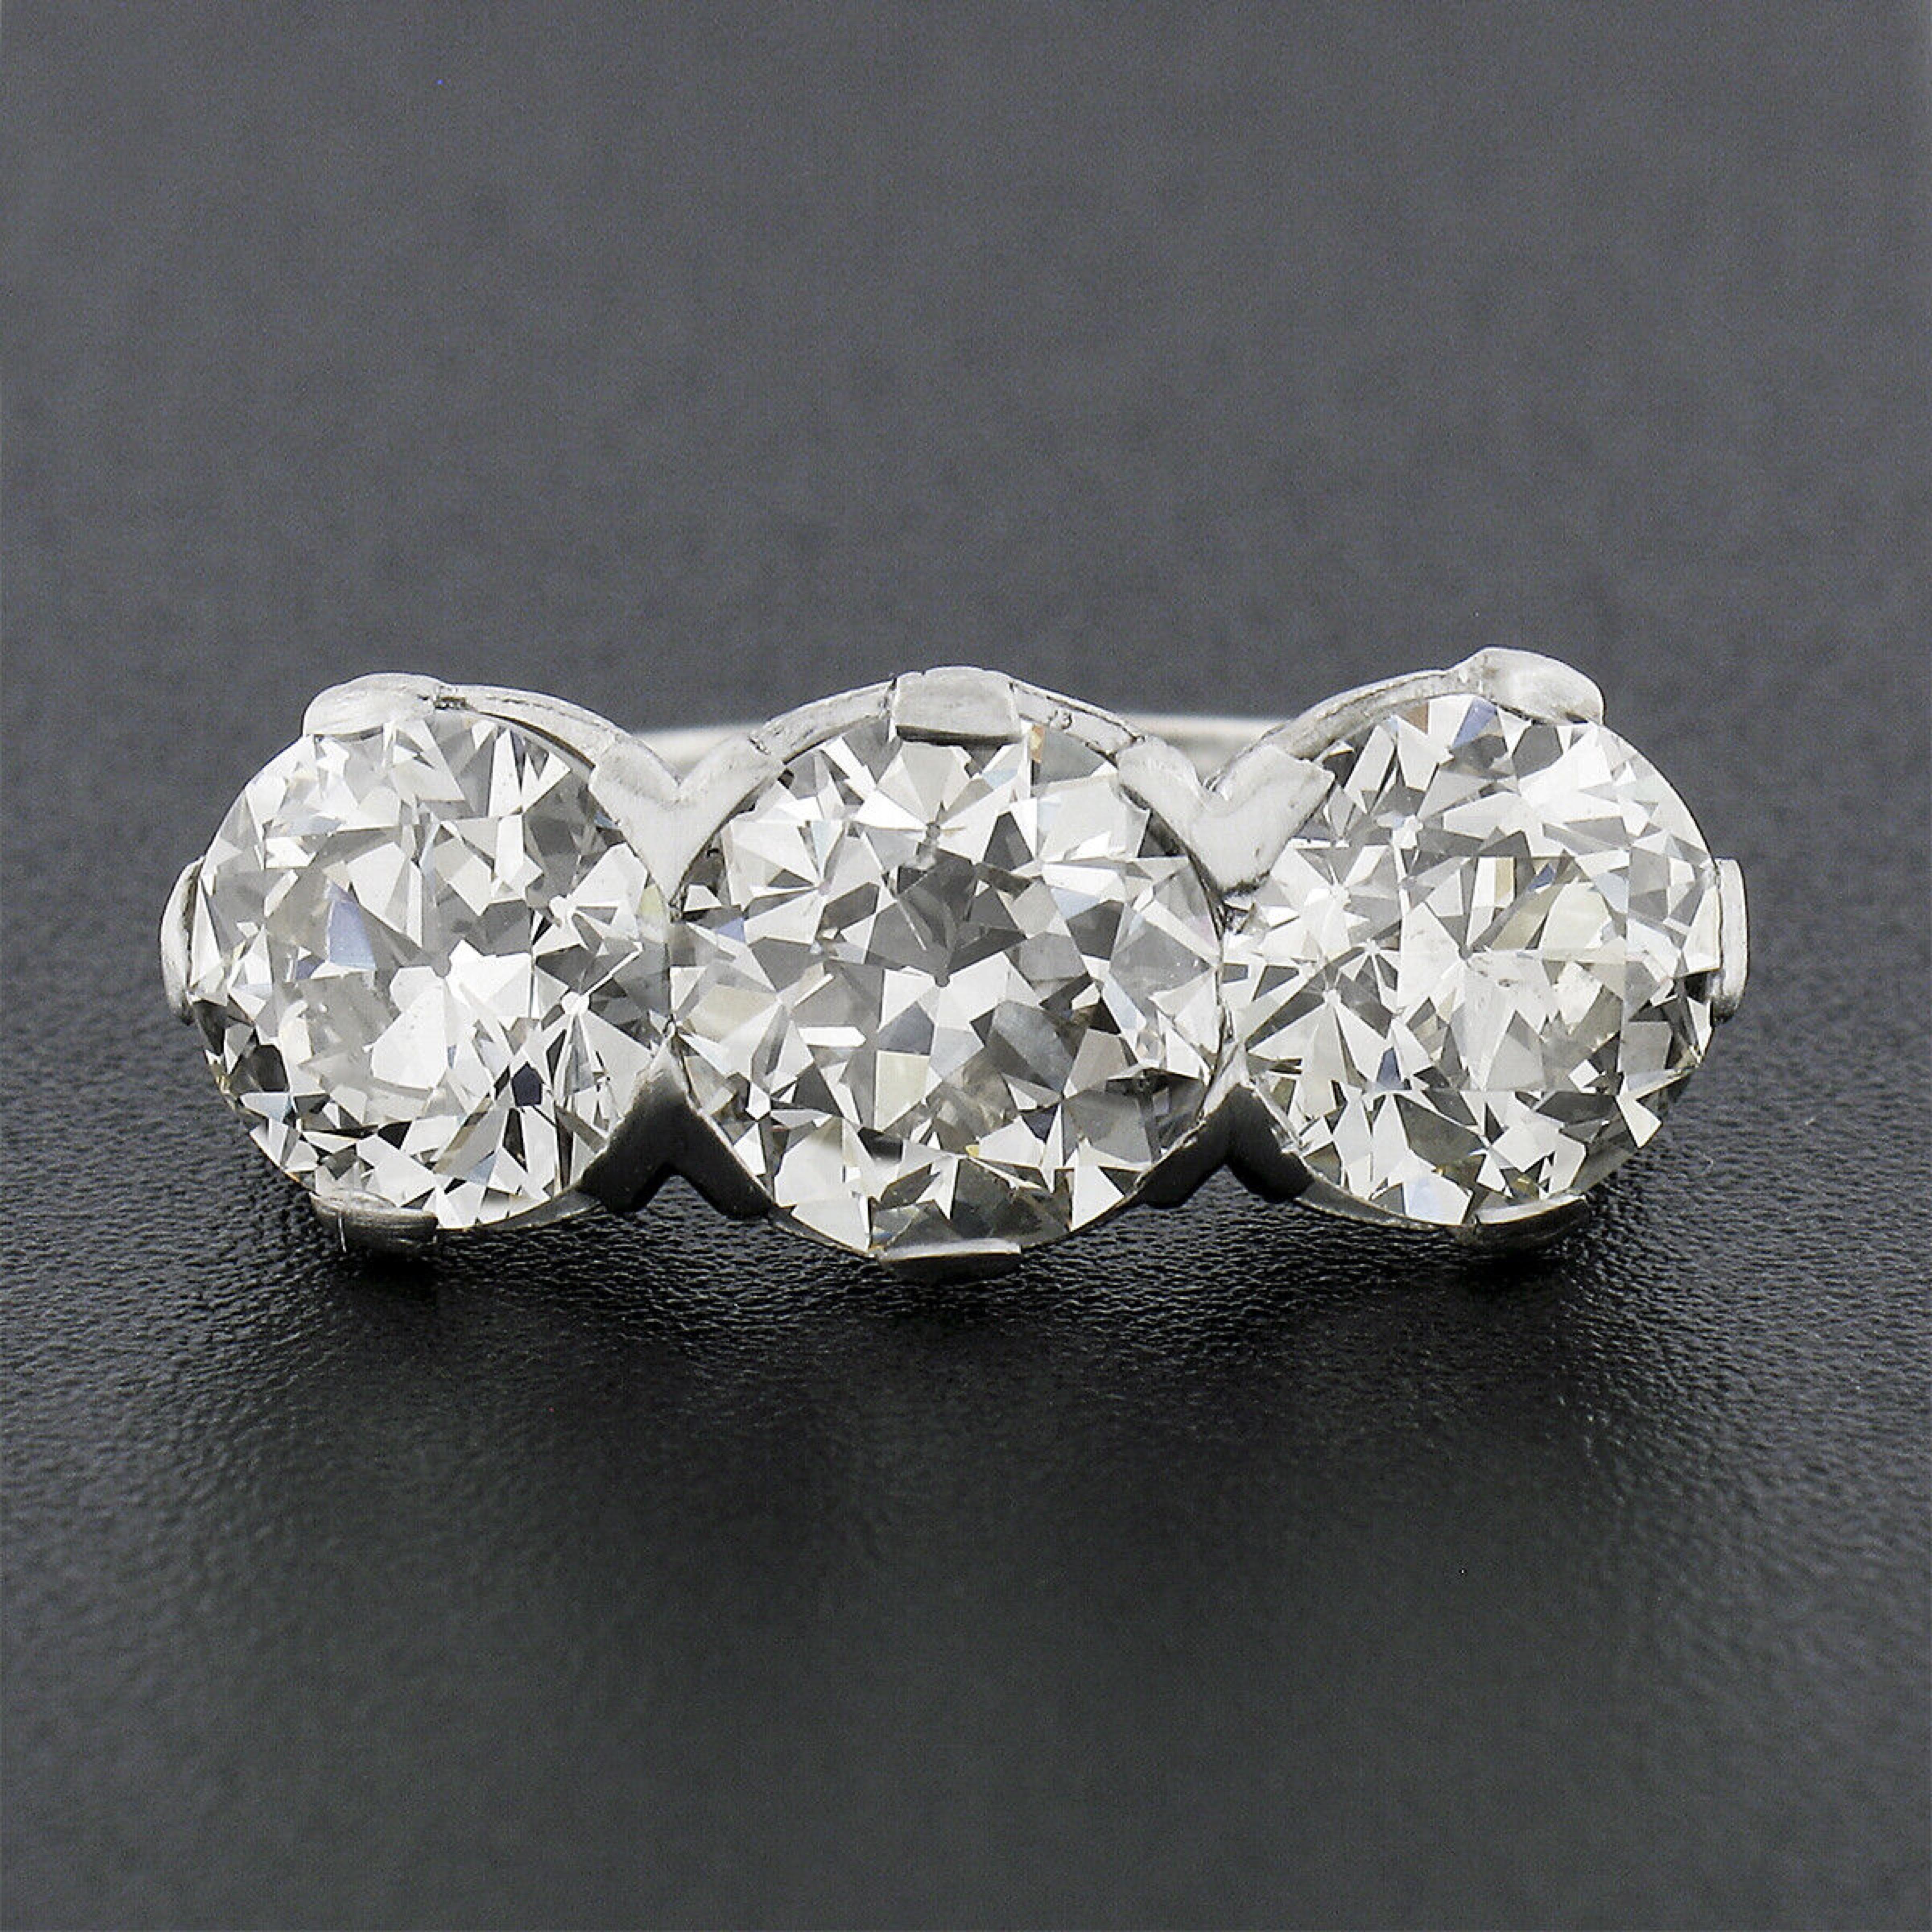 You are looking at a breathtaking and truly jaw dropping antique diamond three stone ring that was crafted from solid platinum during the Edwardian period. All three of these large old European cut diamonds have been certified by GIA and total an